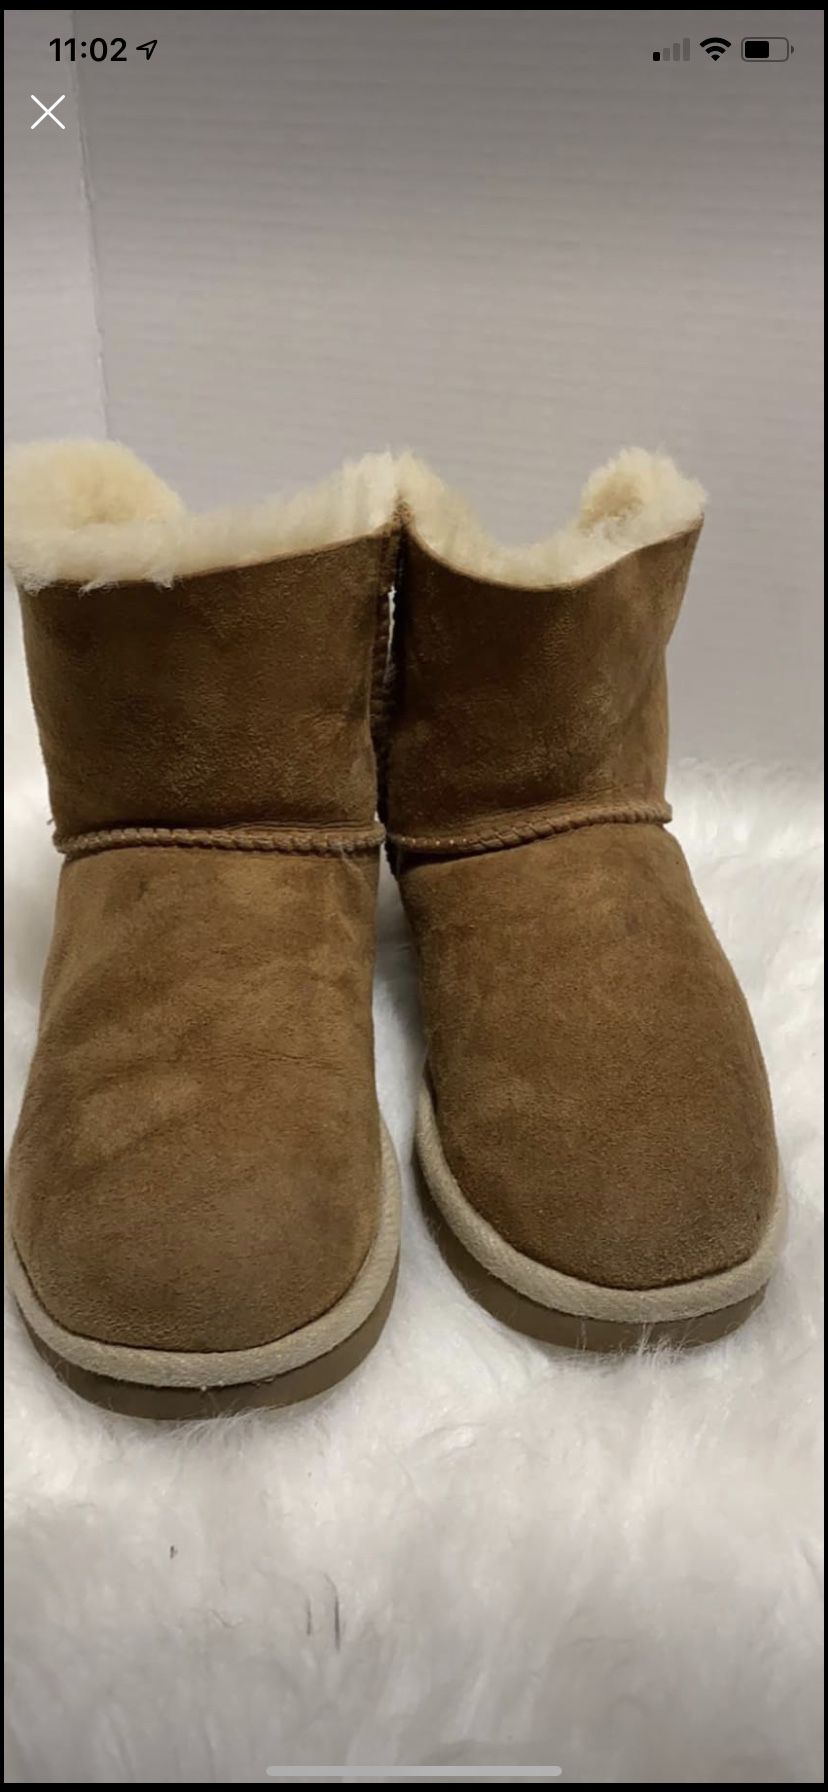 Ugg size 5 in great